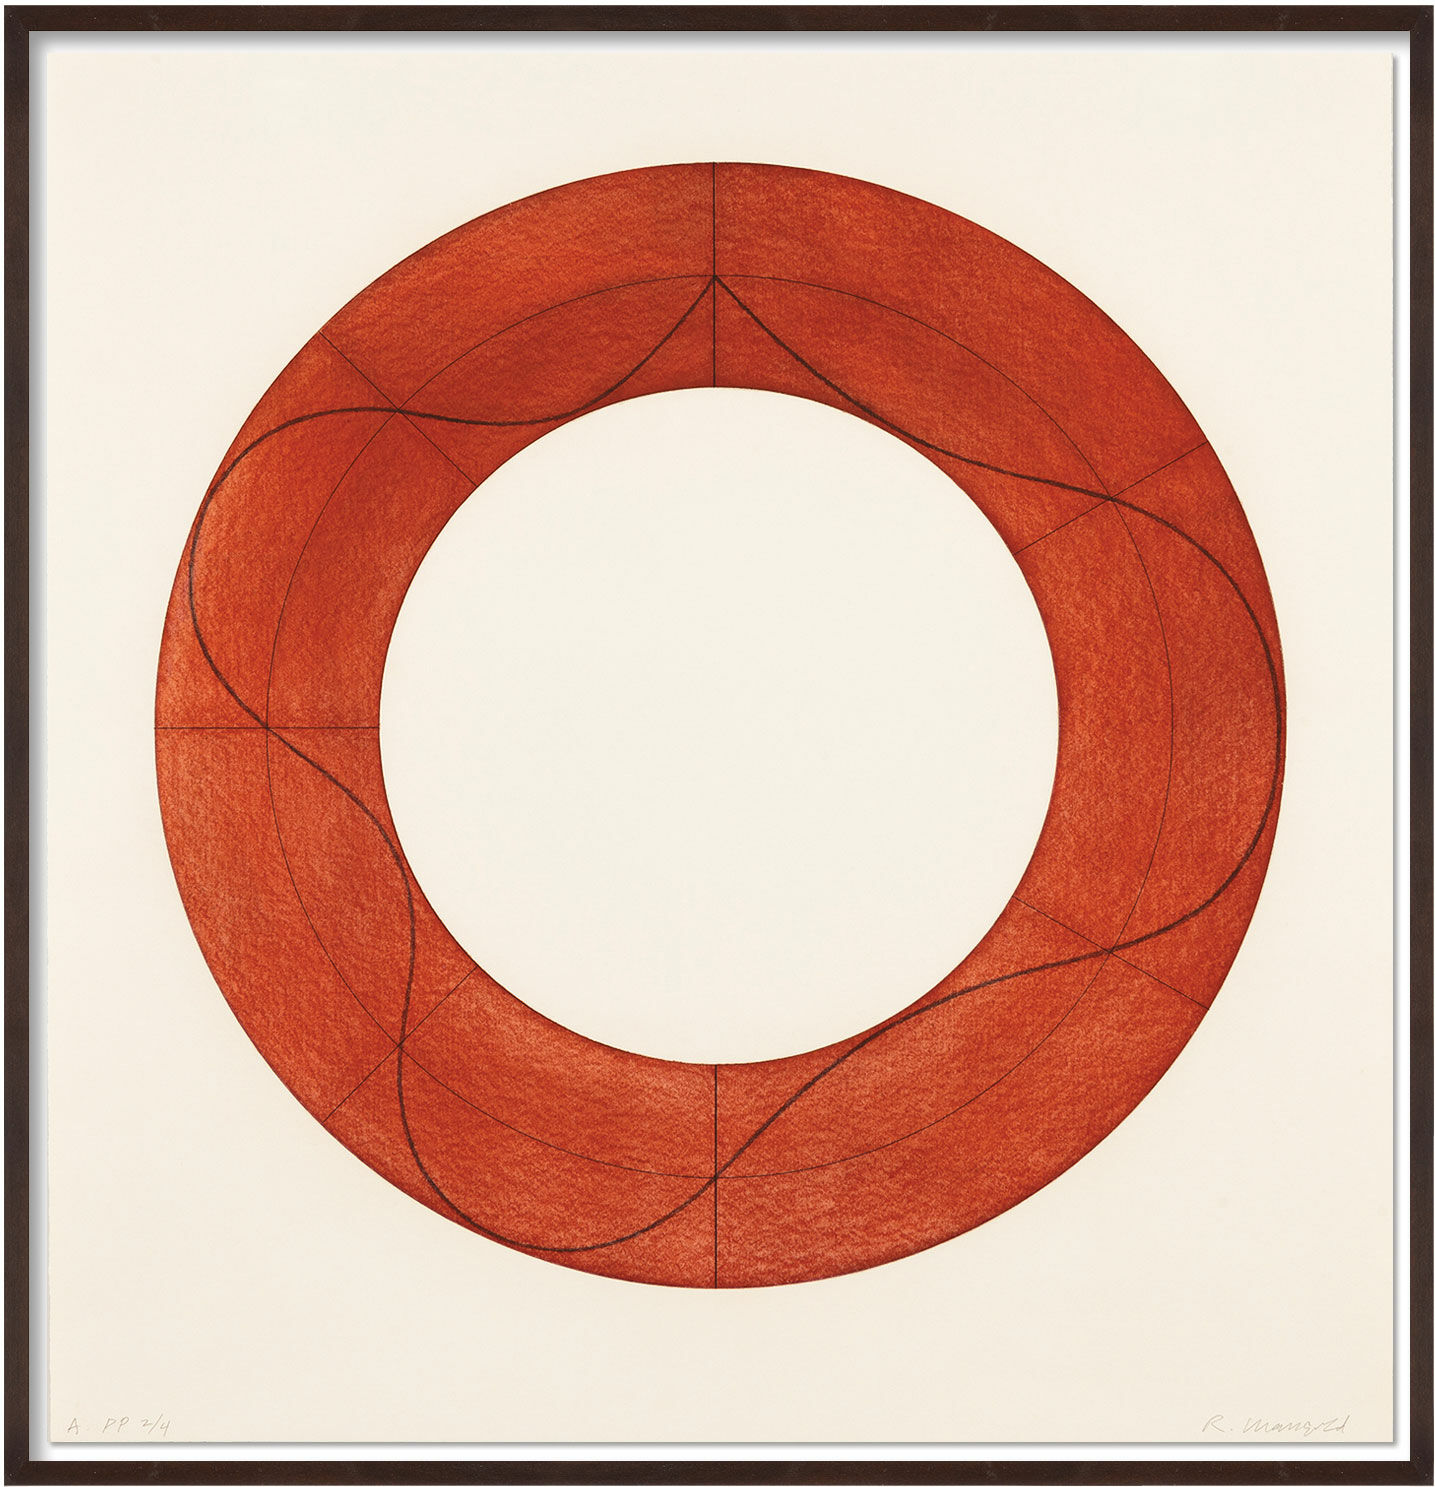 Picture "Ring Image A" (2008) by Robert Mangold